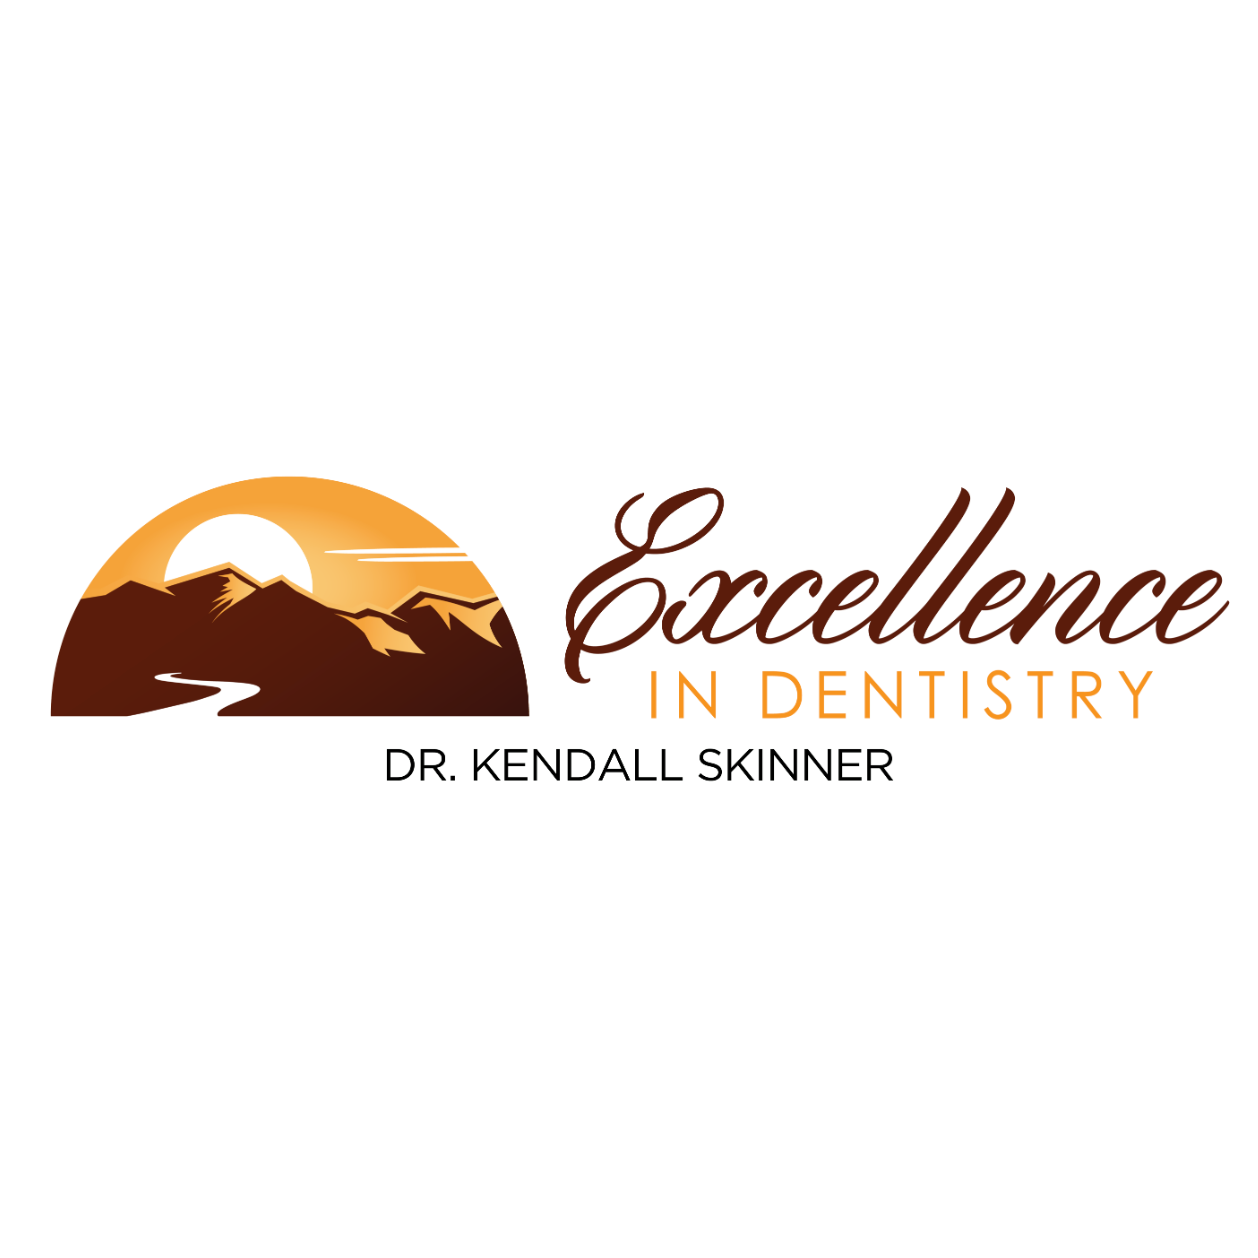 Business logo of Excellence In Dentistry: Dr. Kendall Skinner